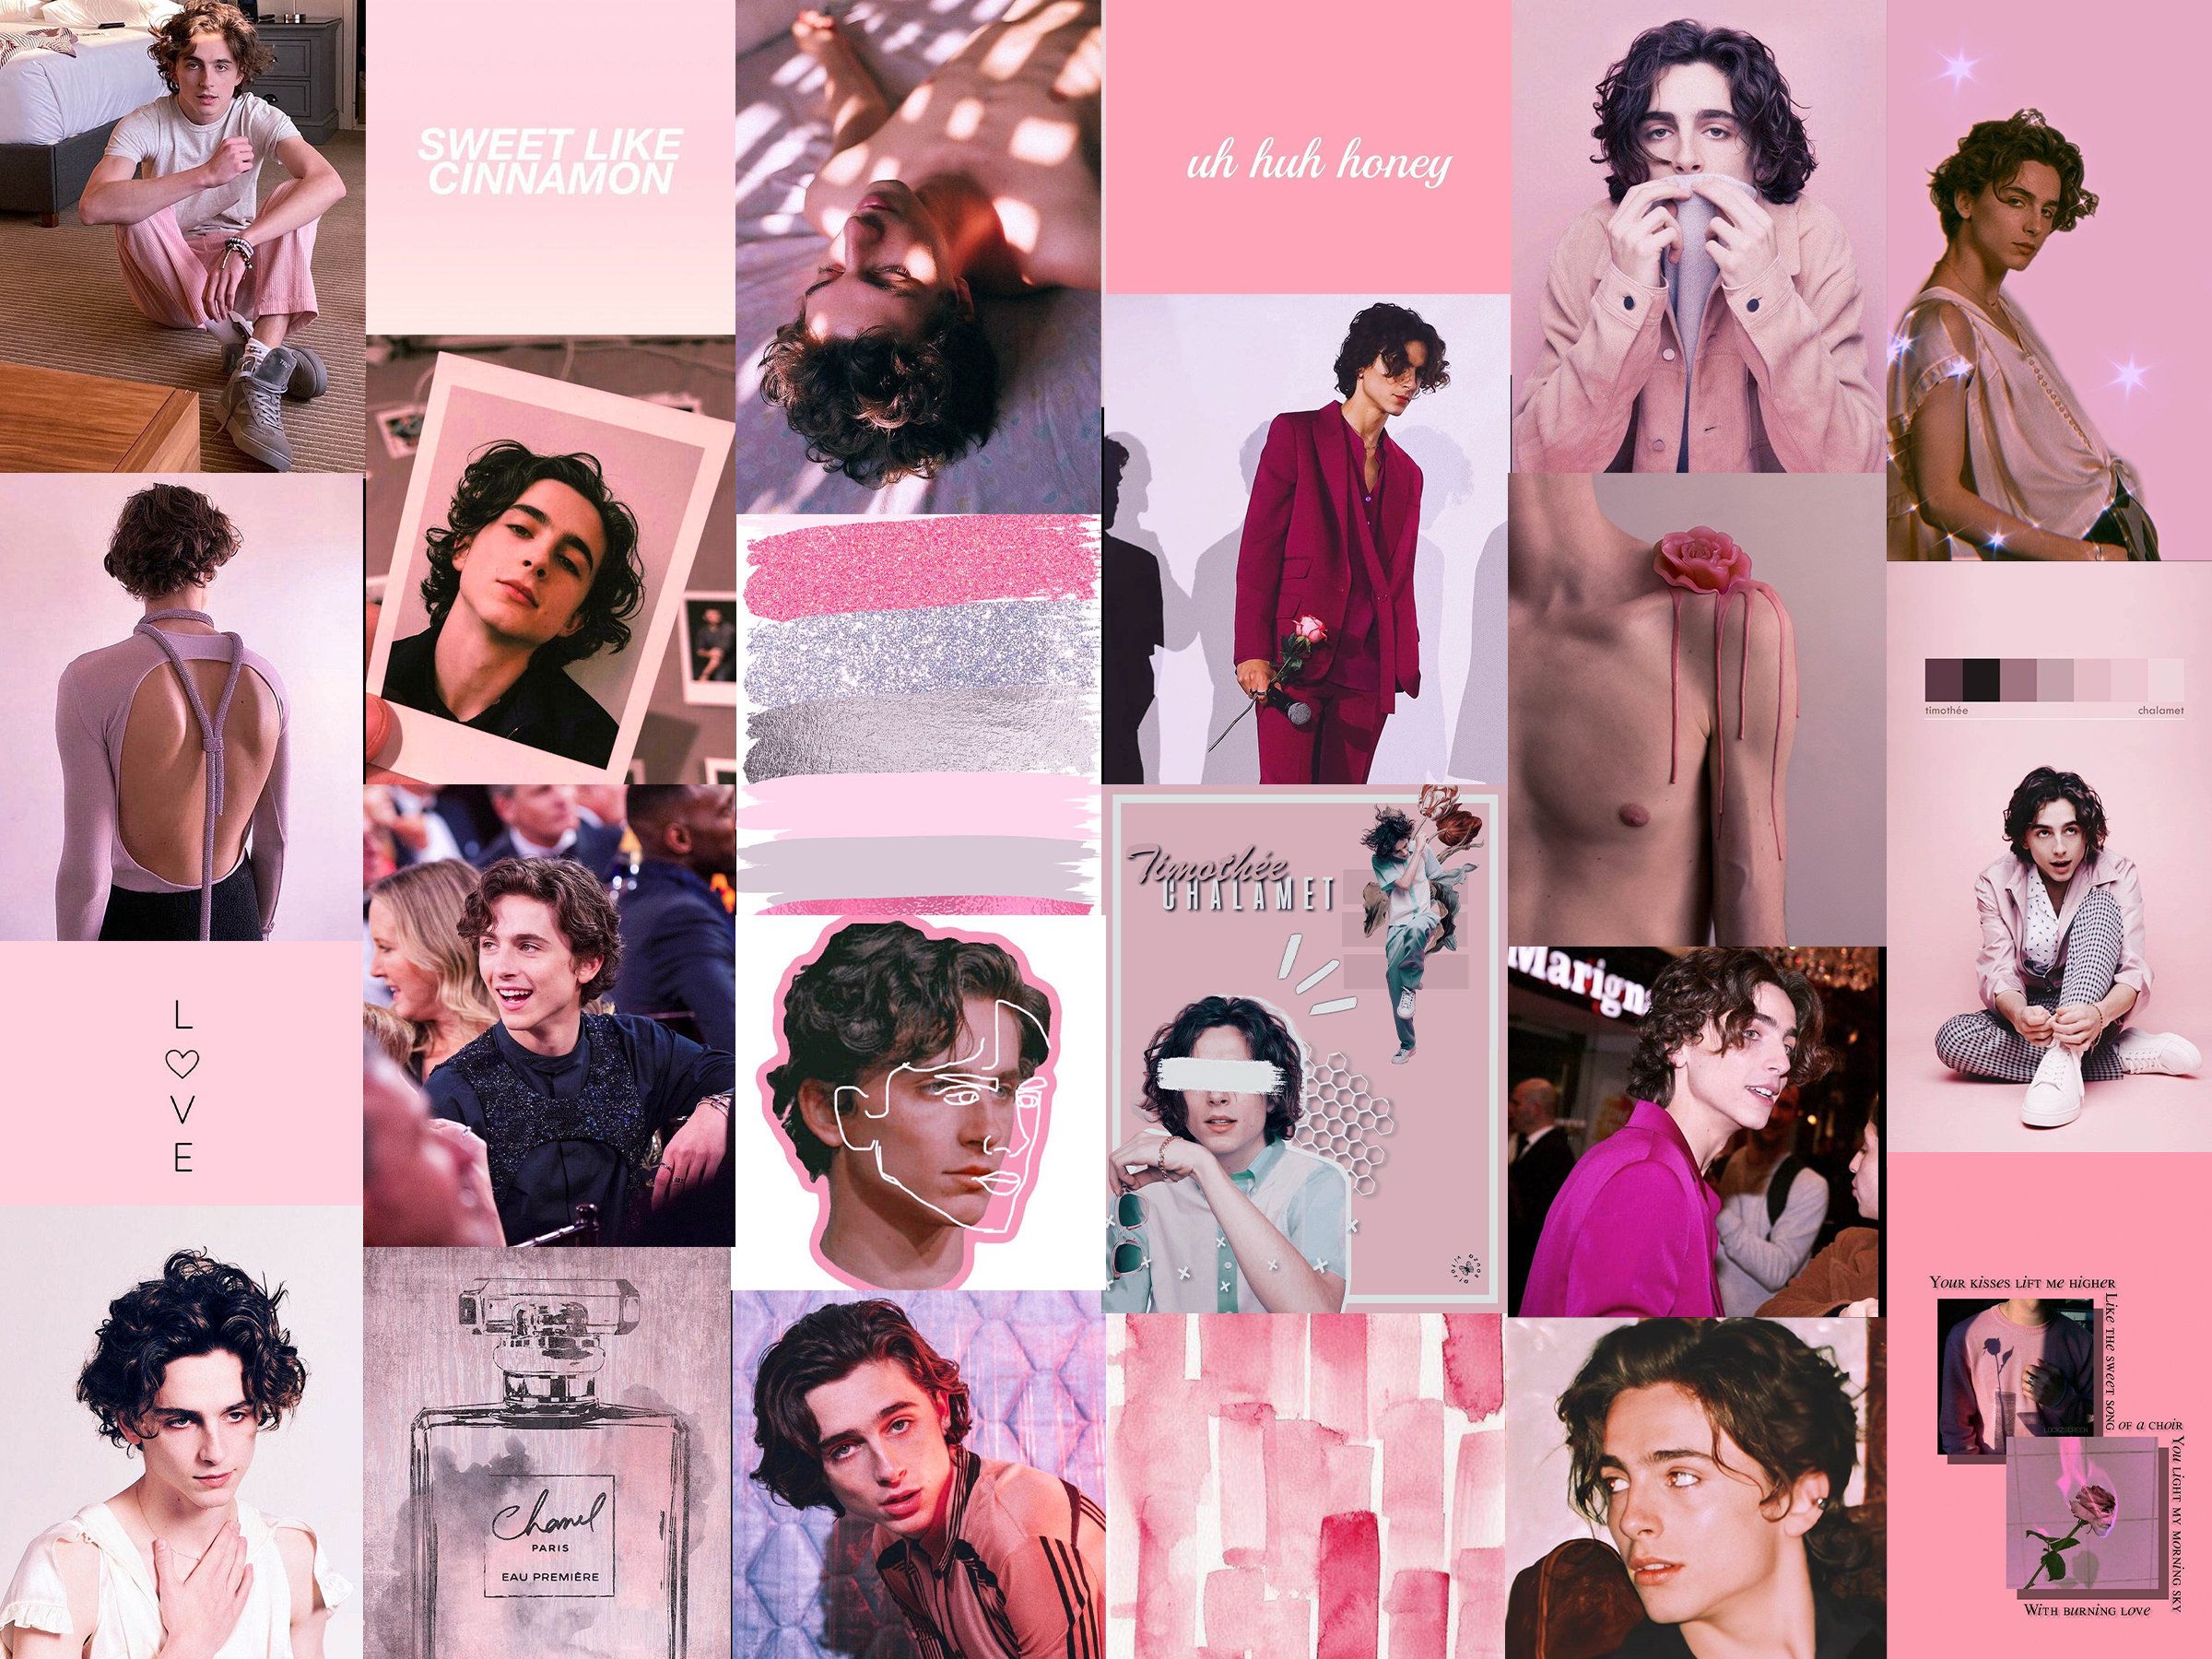 Collage of images of Timothee Chalamet in pink and grey tones - Timothee Chalamet